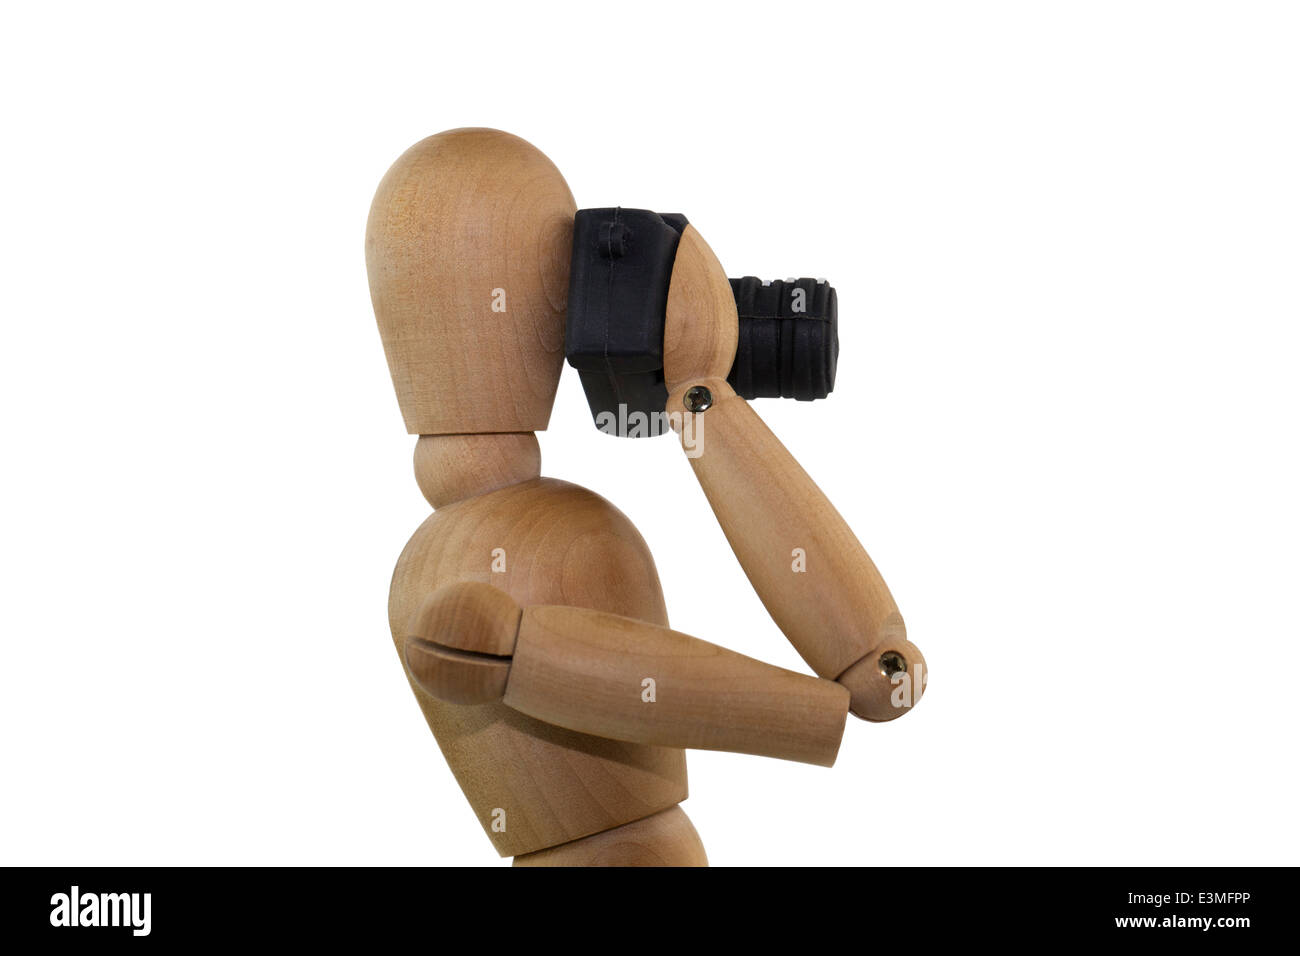 Photographer. Wooden figure taking photos with a reflex camera. Stock Photo